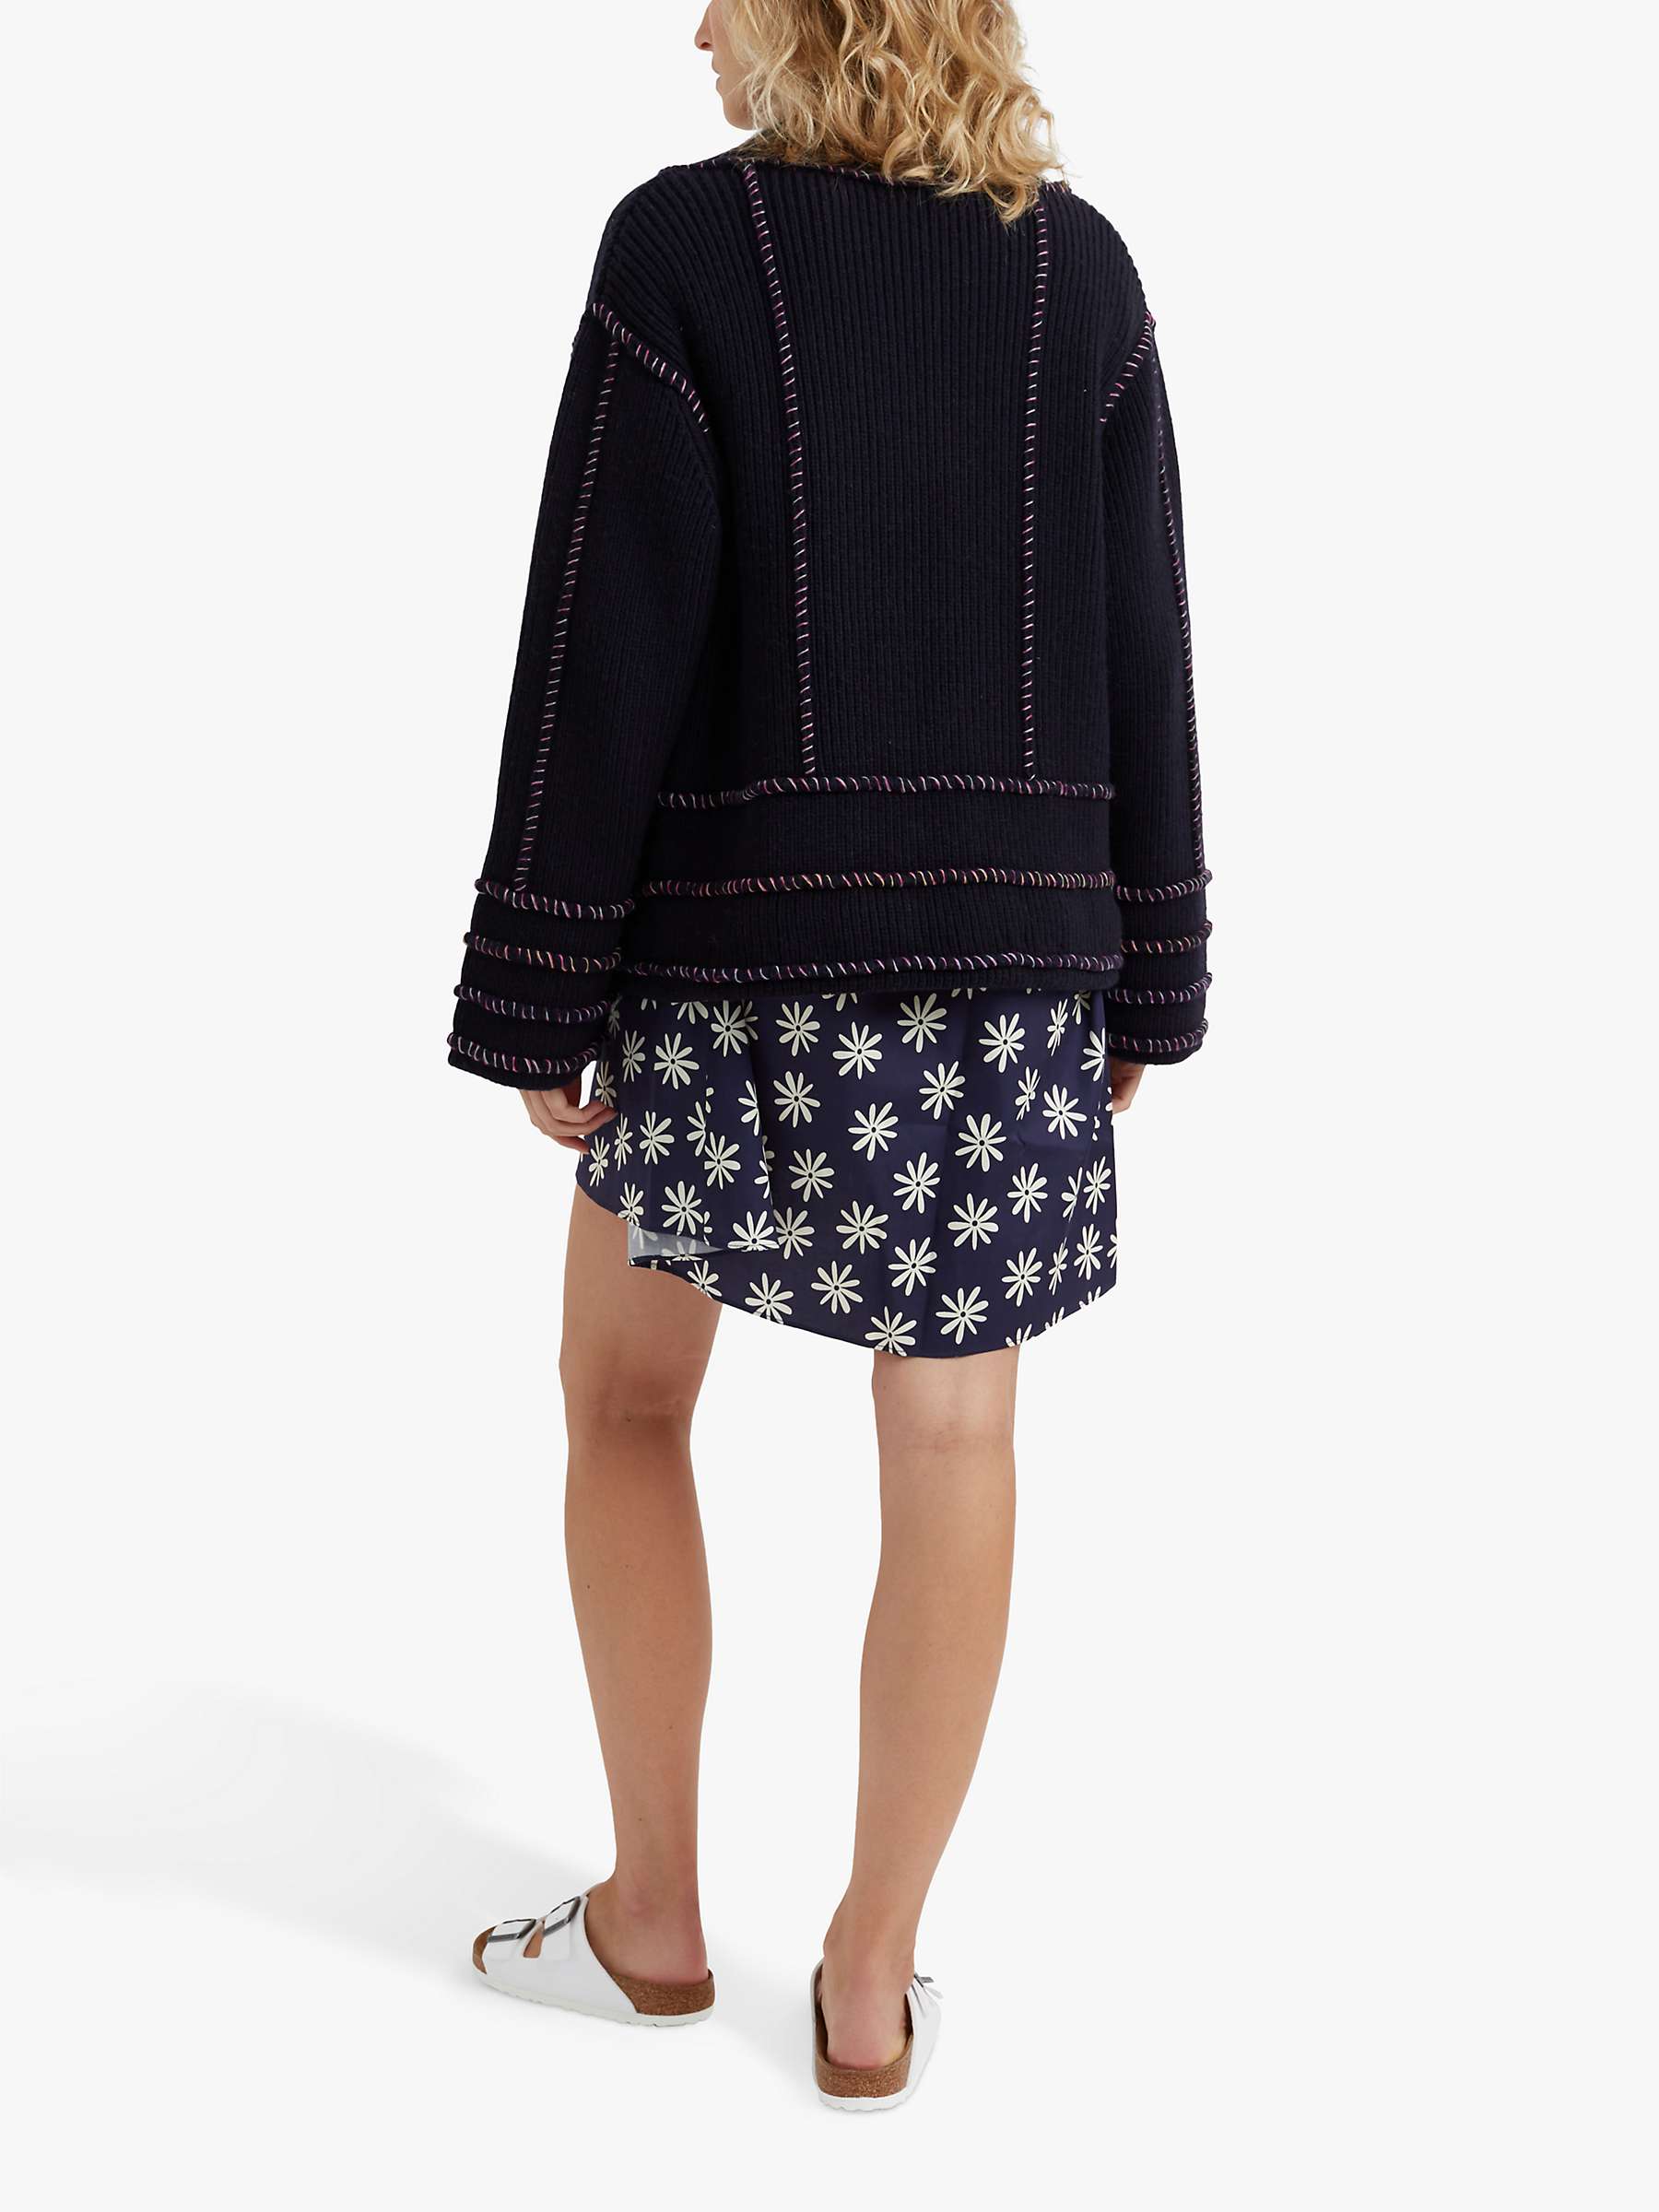 Buy Chinti & Parker Contrast Stitch Wool Cashmere Blend Jacket, Deep Navy/Multi Online at johnlewis.com